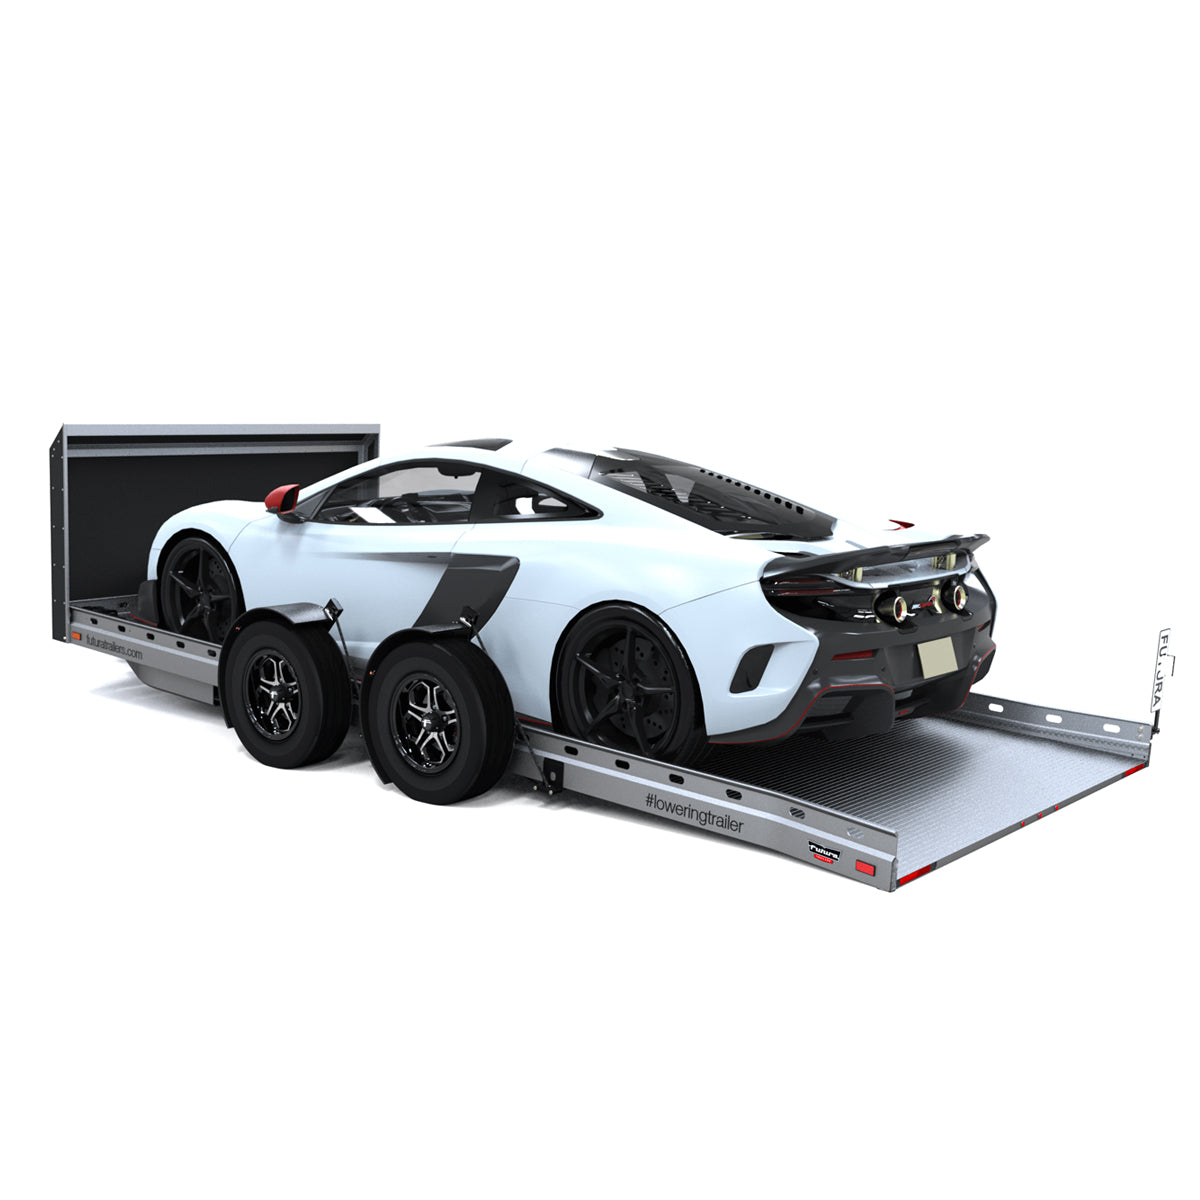 Super Sport Lowering Trailer from $14,995*